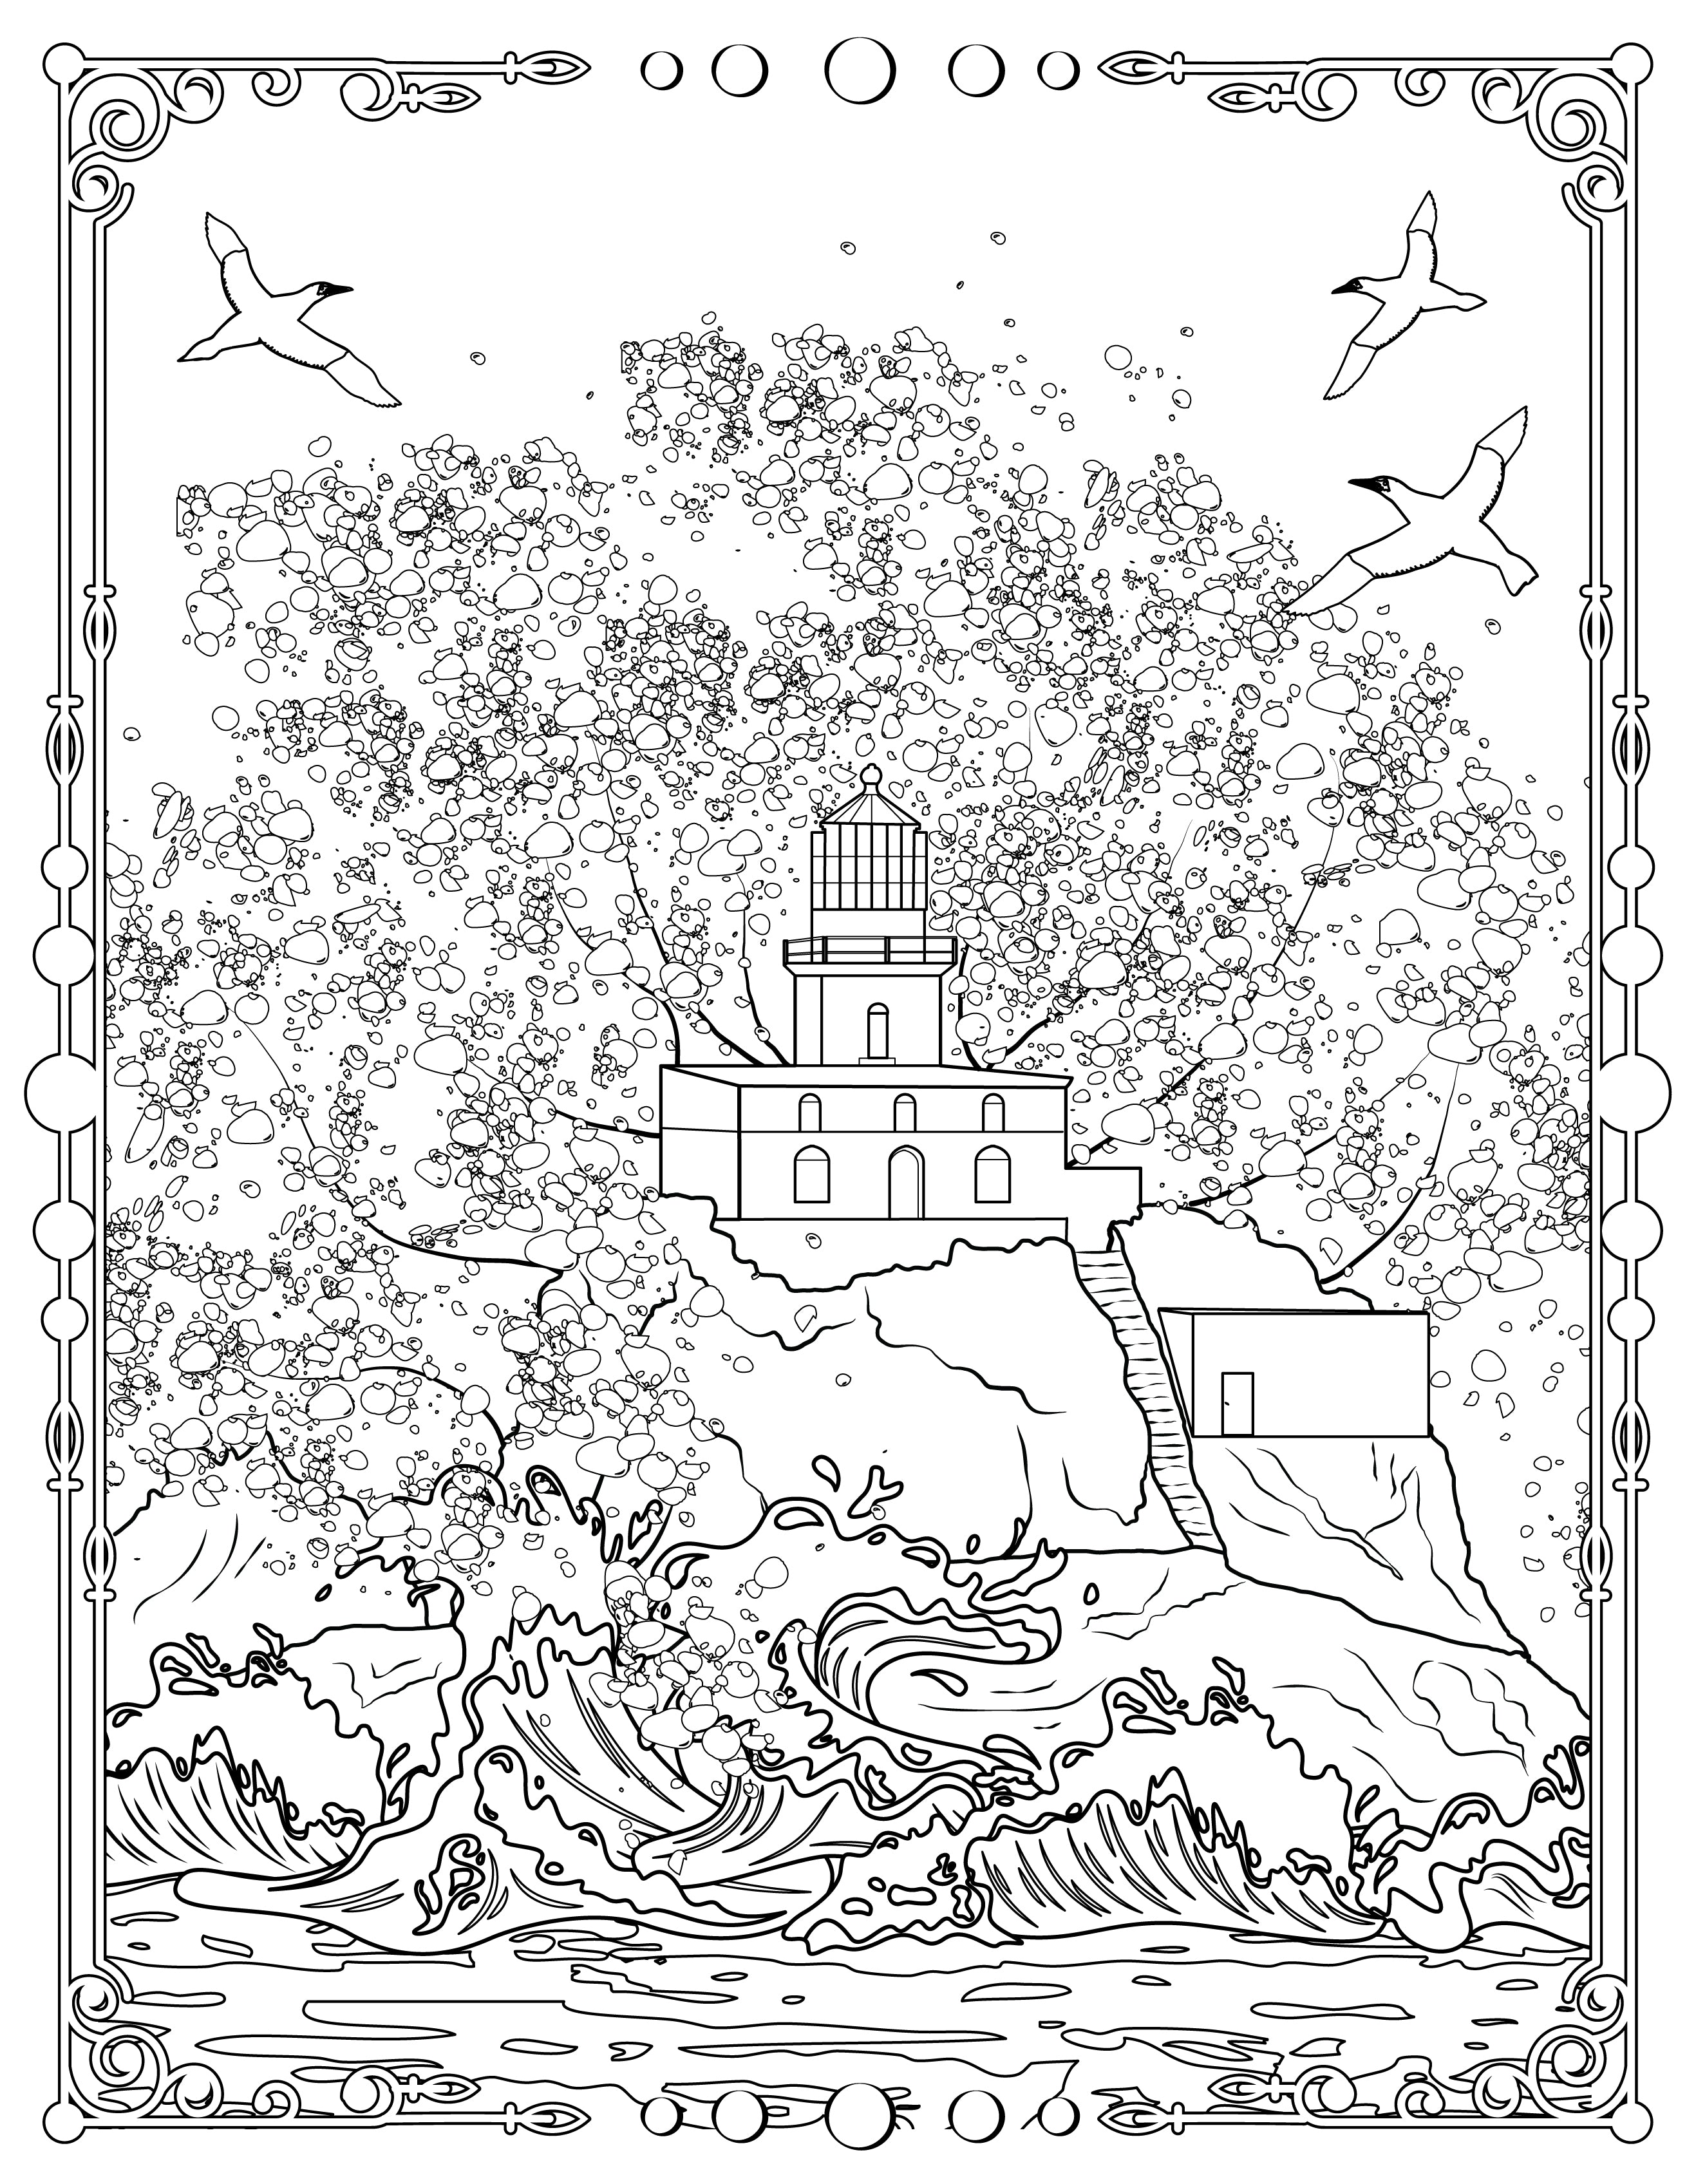 Single Coloring Book Page - Tillamook Rock Lighthouse, Oregon - Digital Print-from-Home